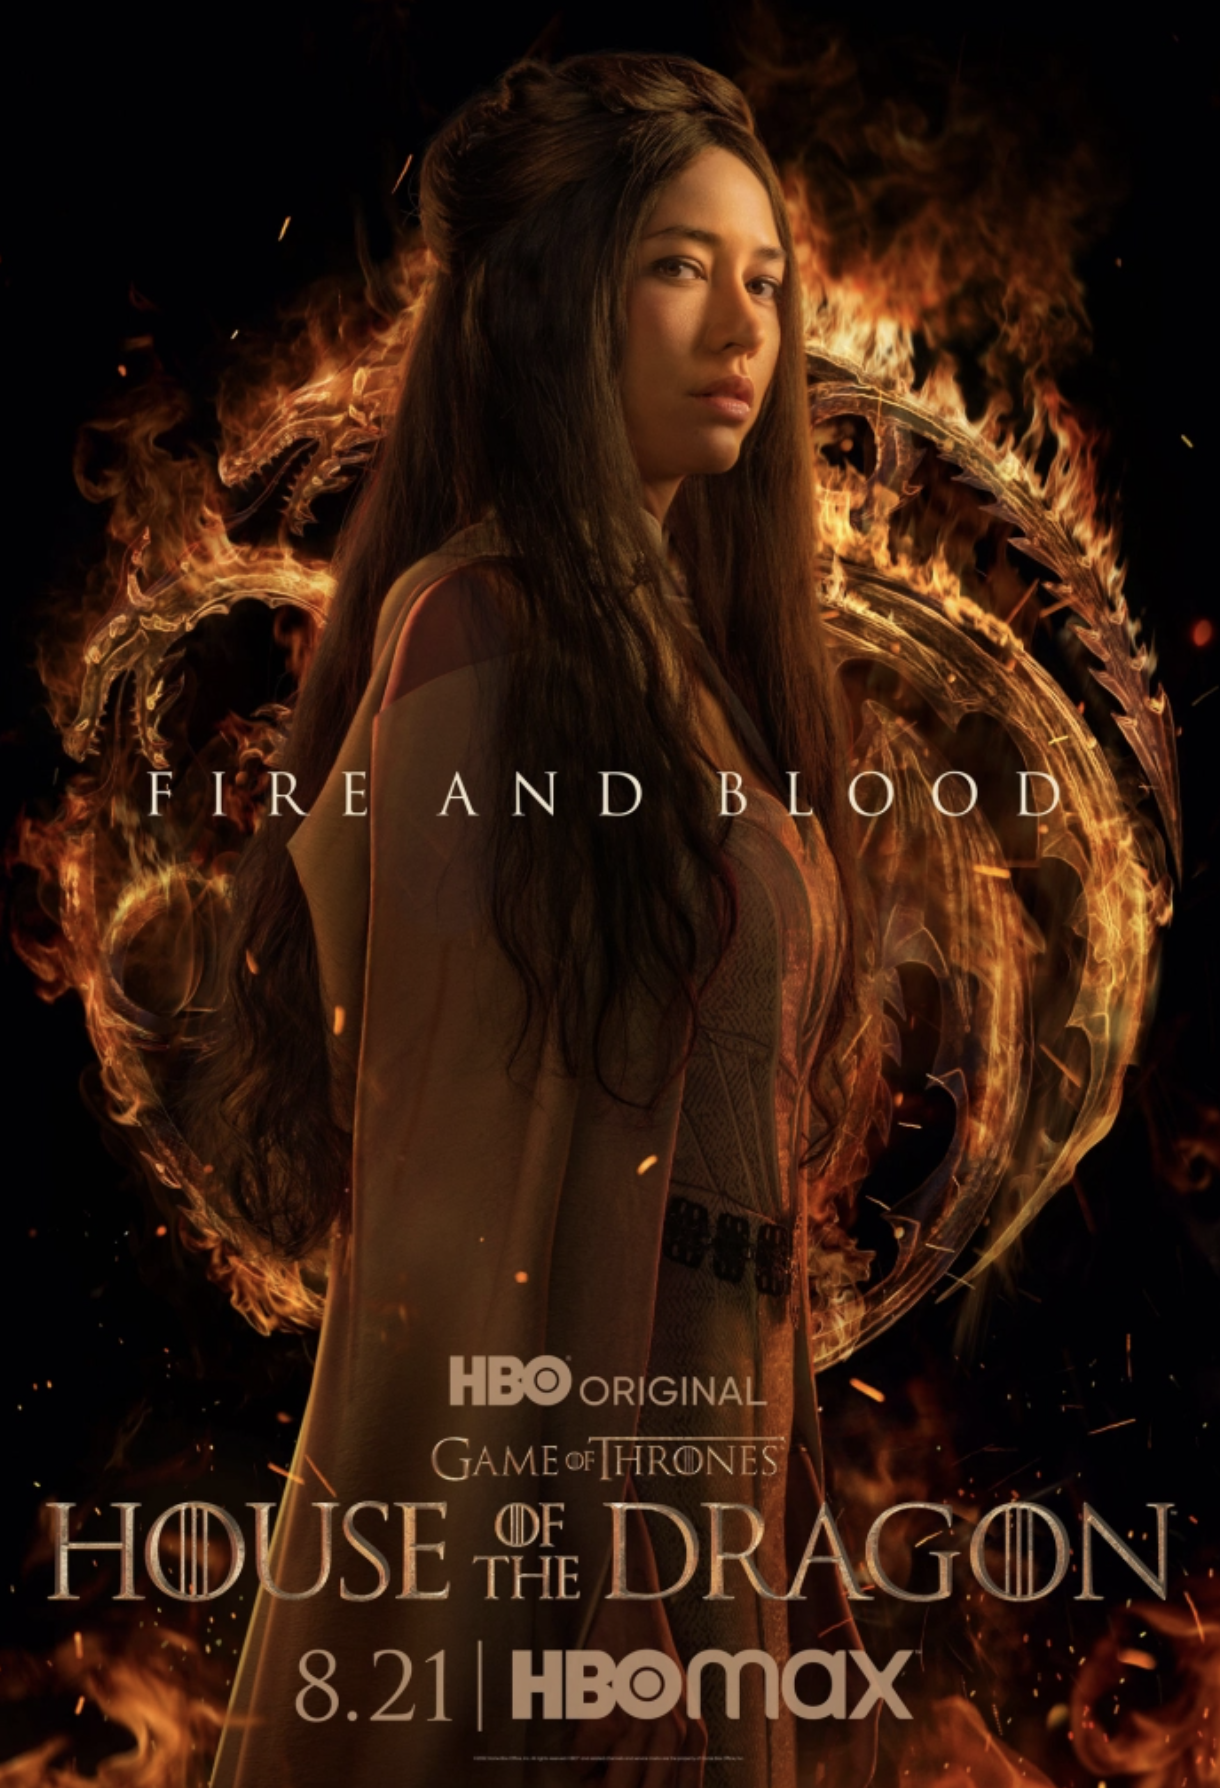 HBO releases a NEW poster for the video game turned TV series 'The